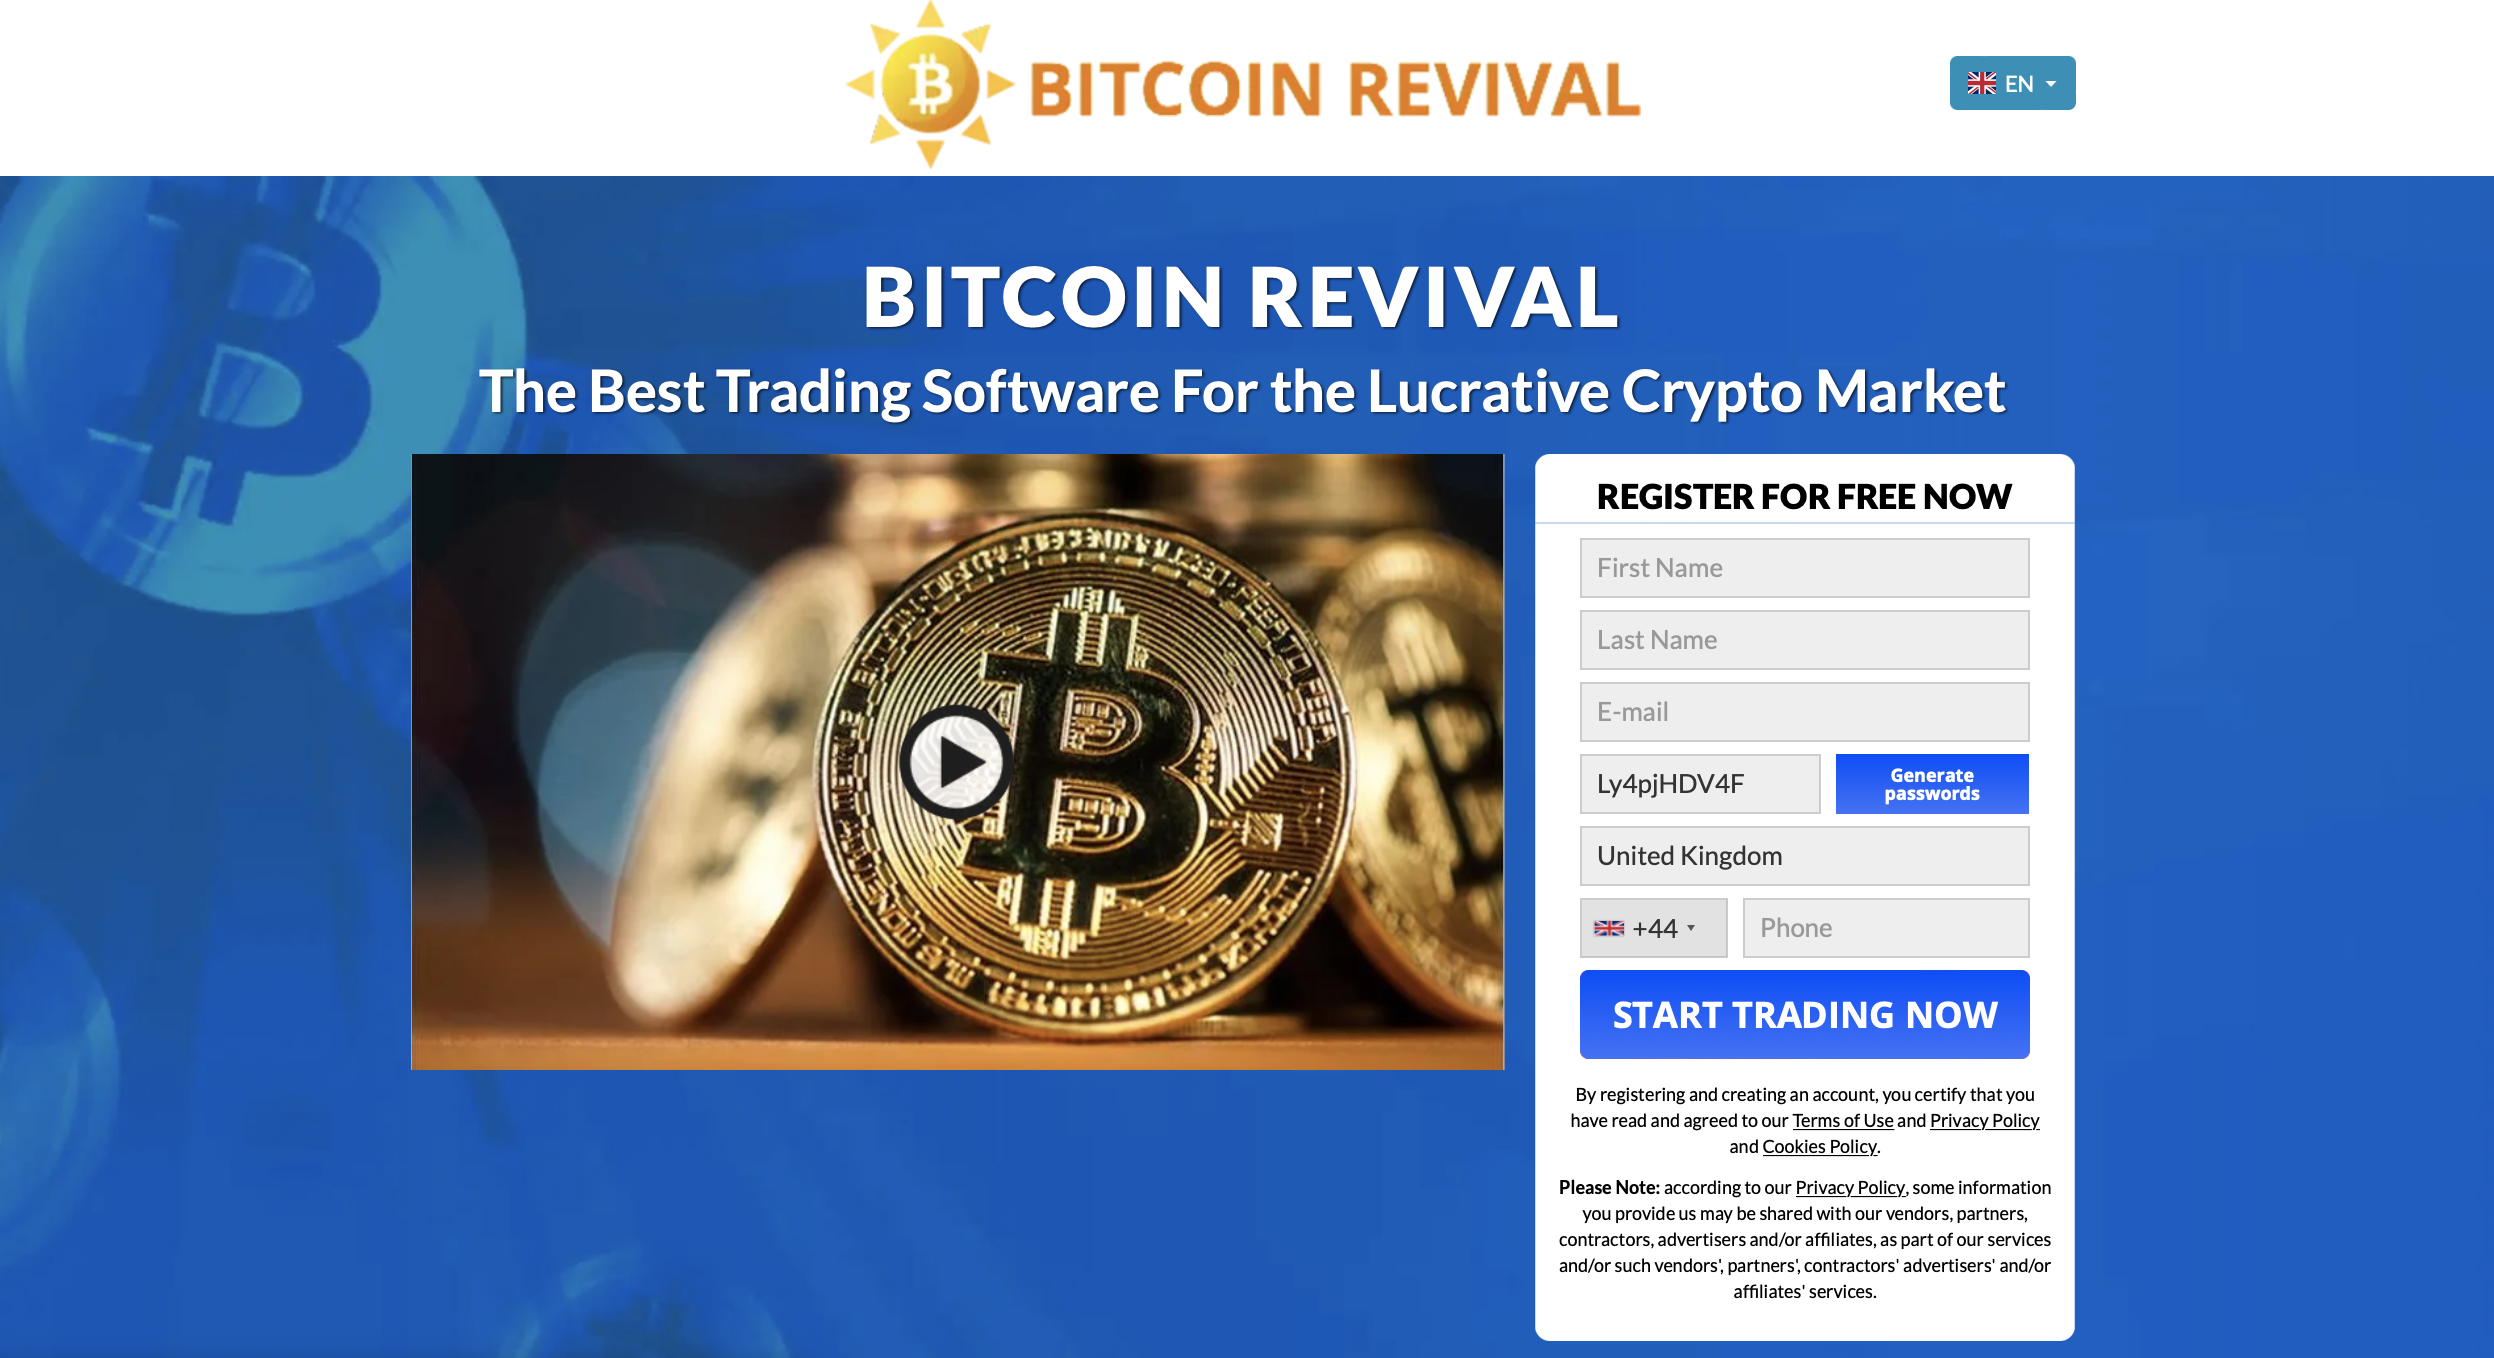 The official website of Bitcoin Revival 